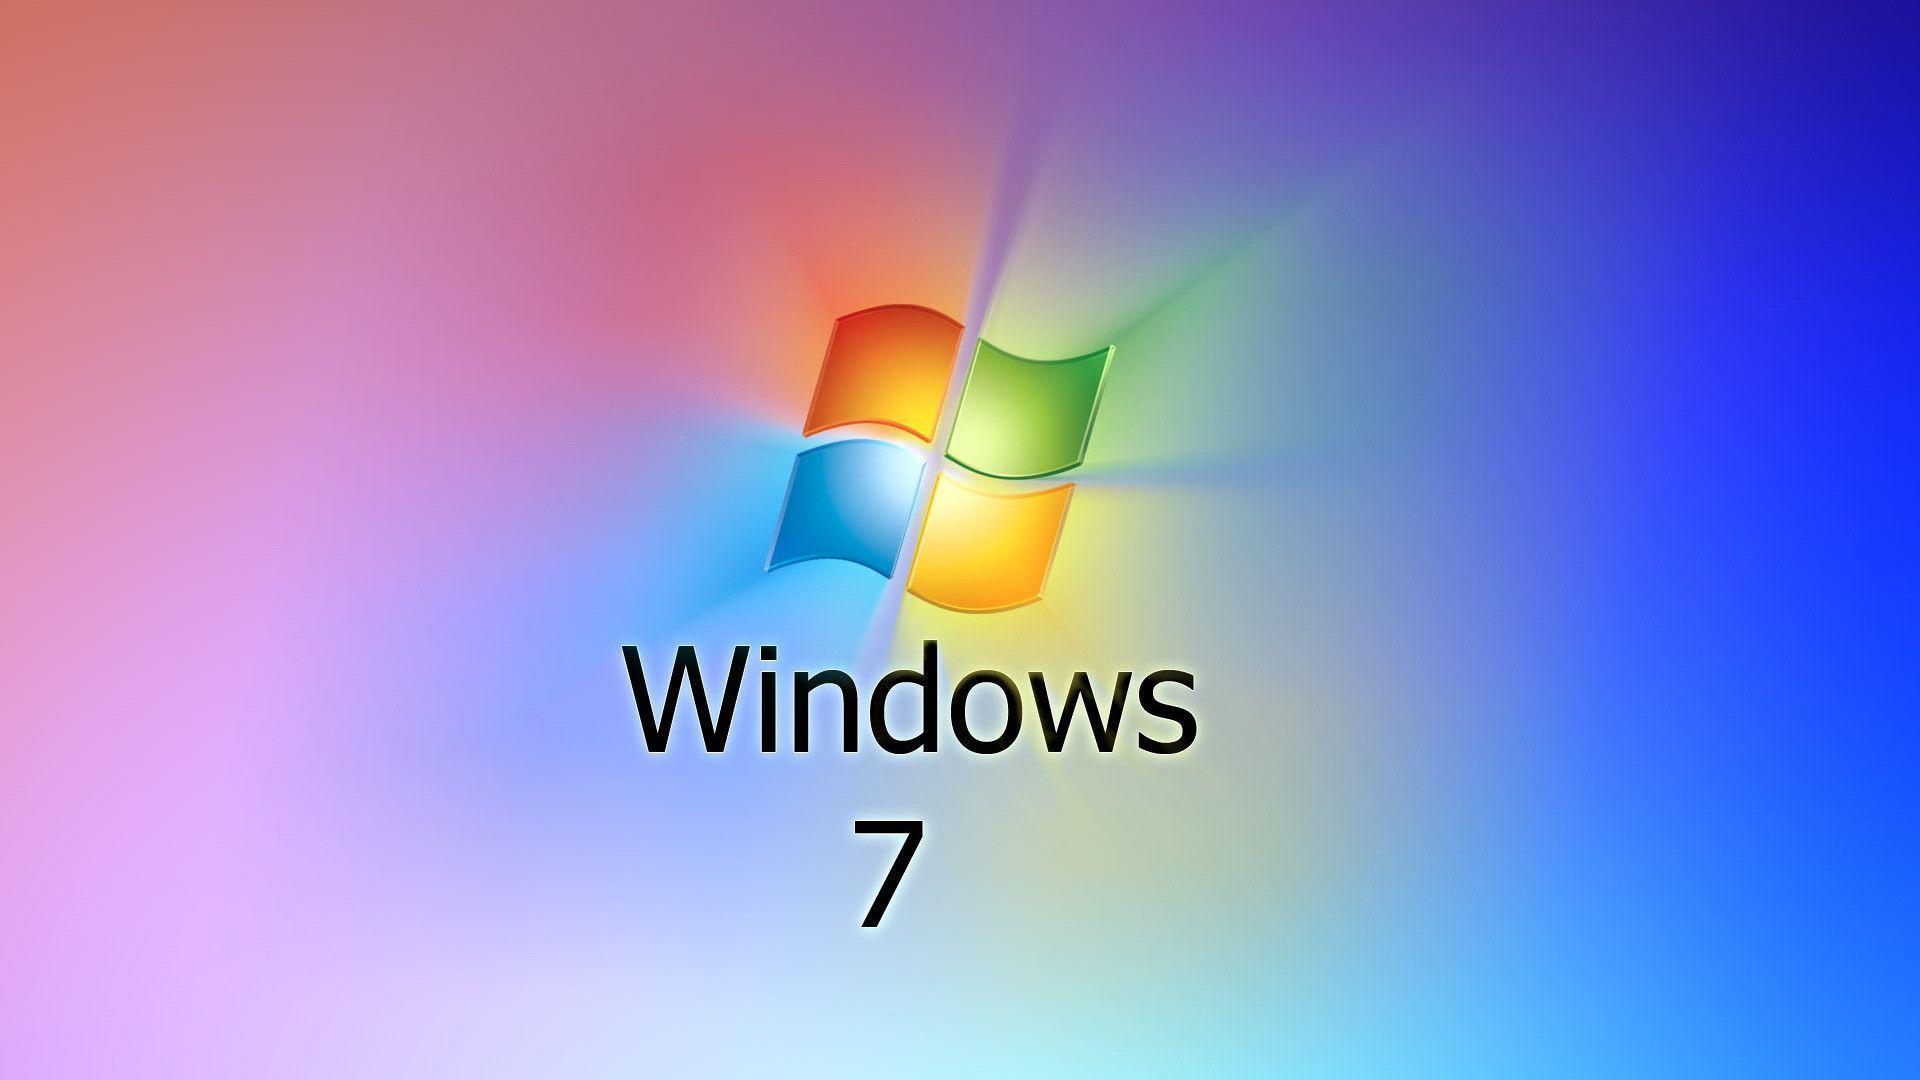 Image For > Windows 7 Wallpapers Hd 1080p